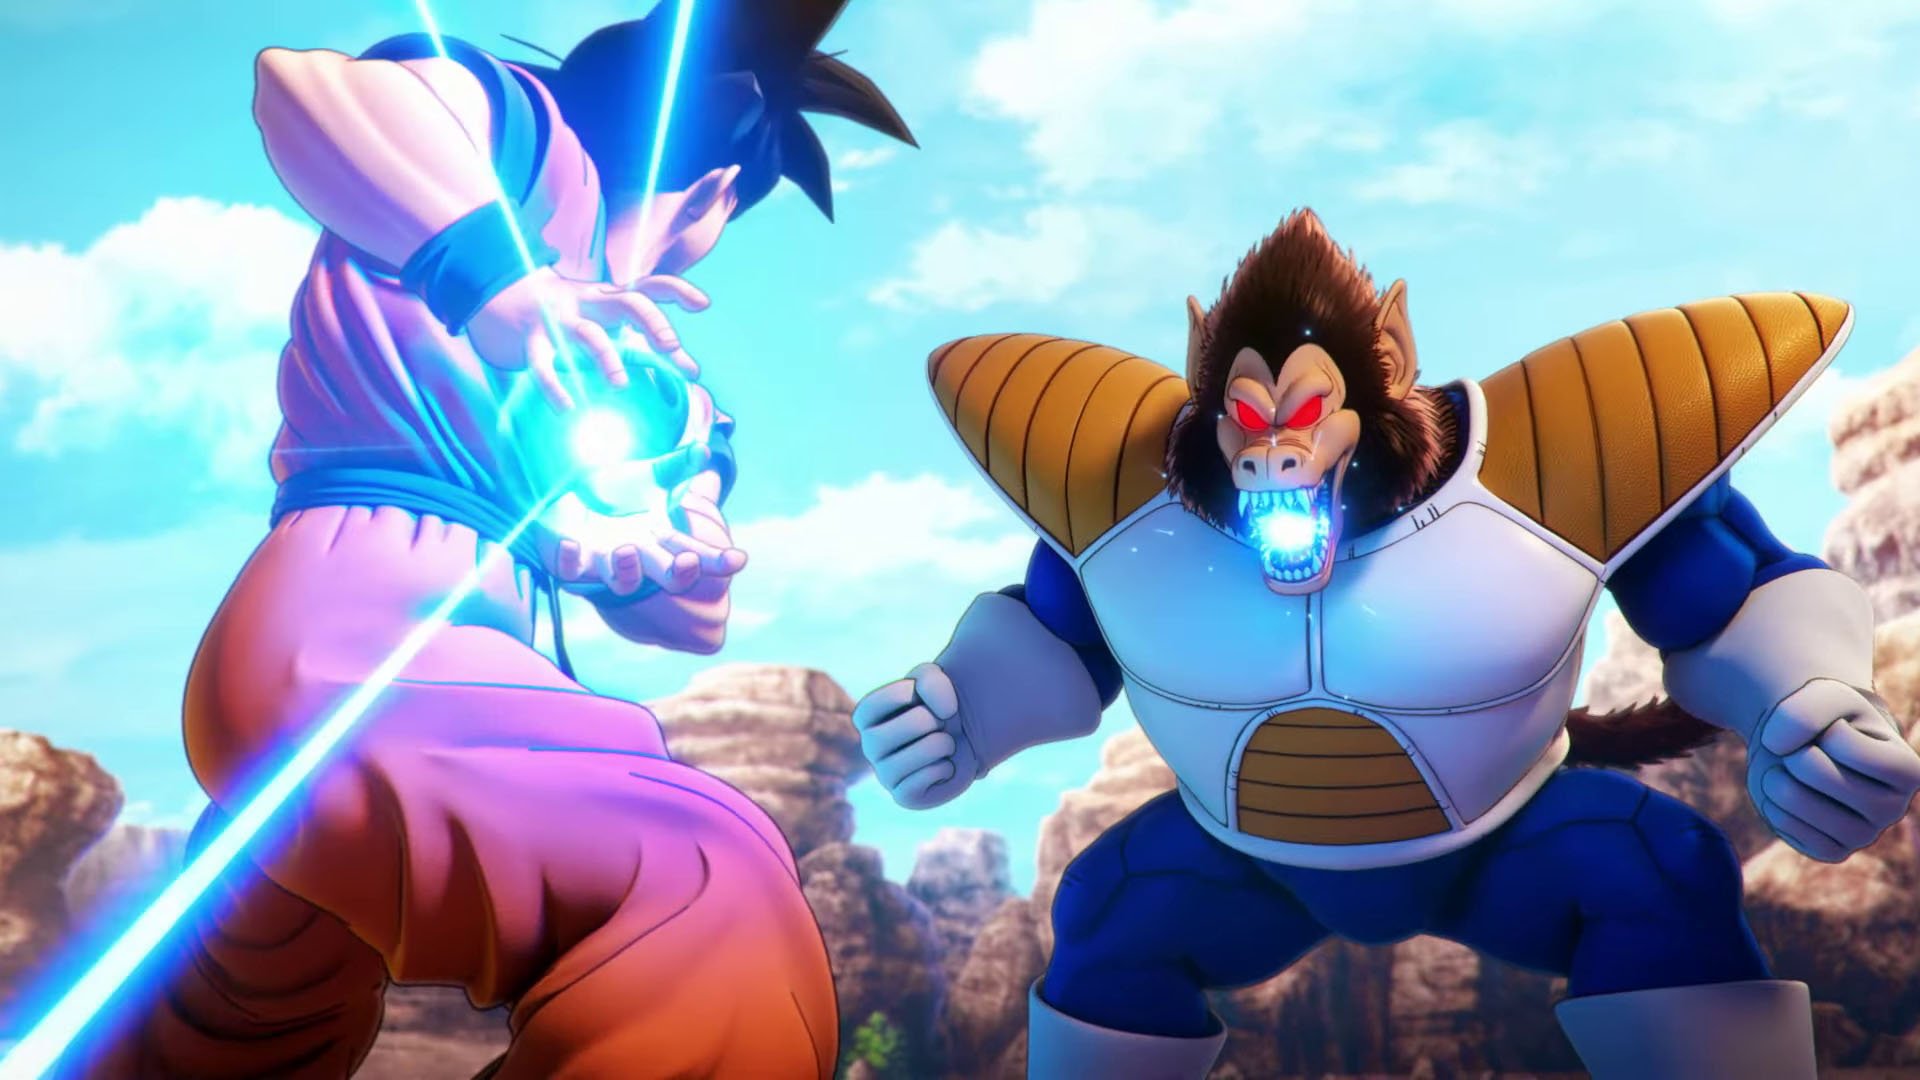 Dragon Ball: The Breakers - Season 2 Patch Notes 2.0